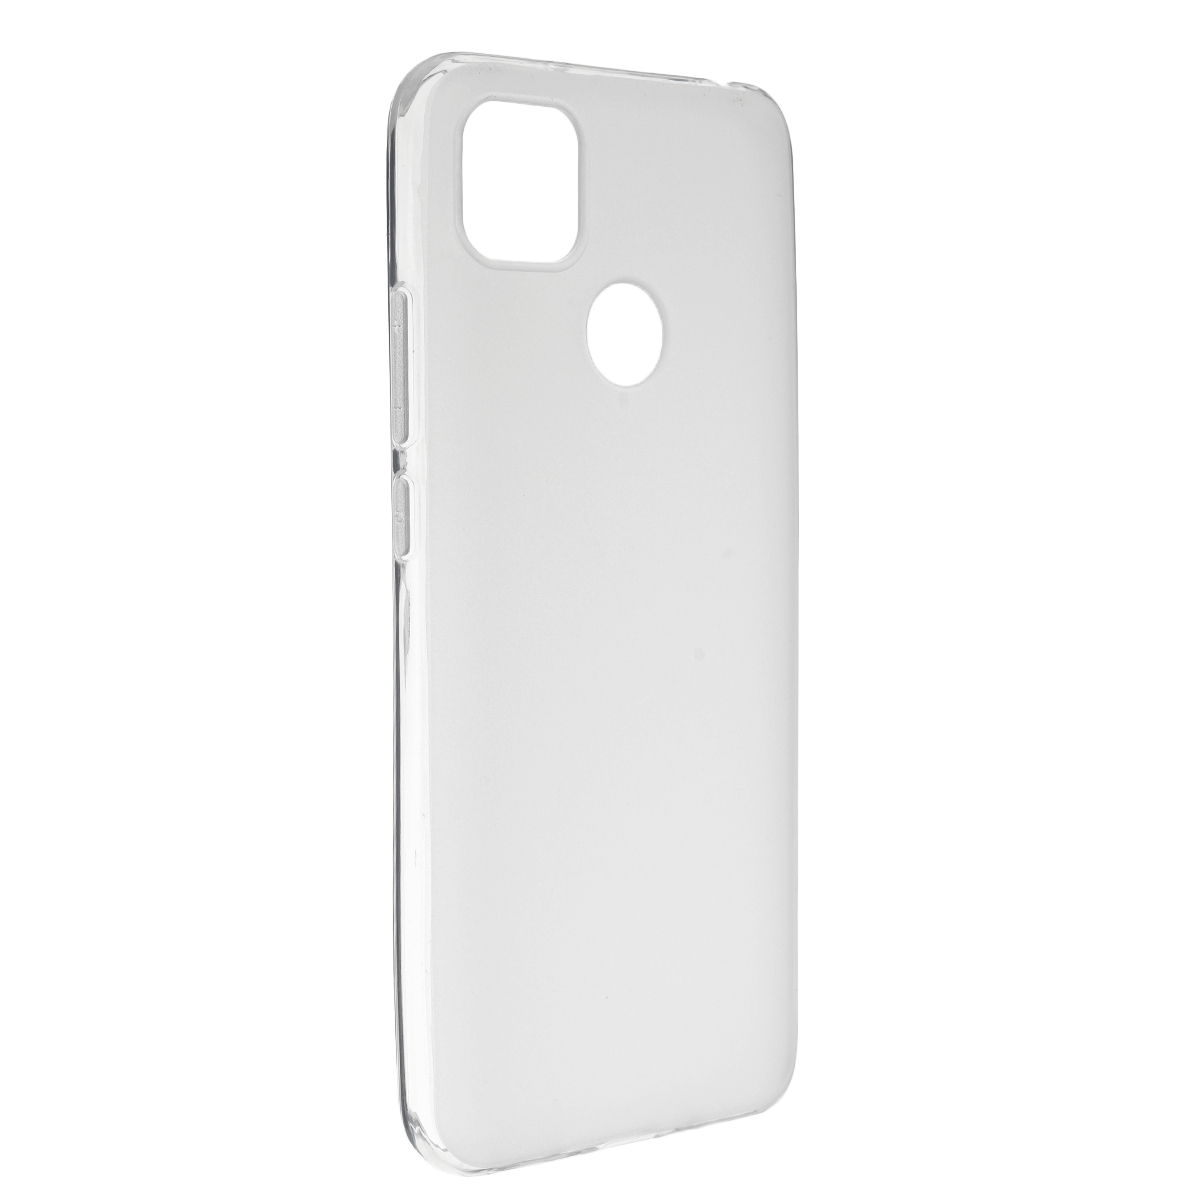 Bakeey-Pudding-Series-Frosted-Shockproof-Ultra-Thin-Non-Yellow-Anti-Fingerprint-Soft-TPU-Protective--1735438-10